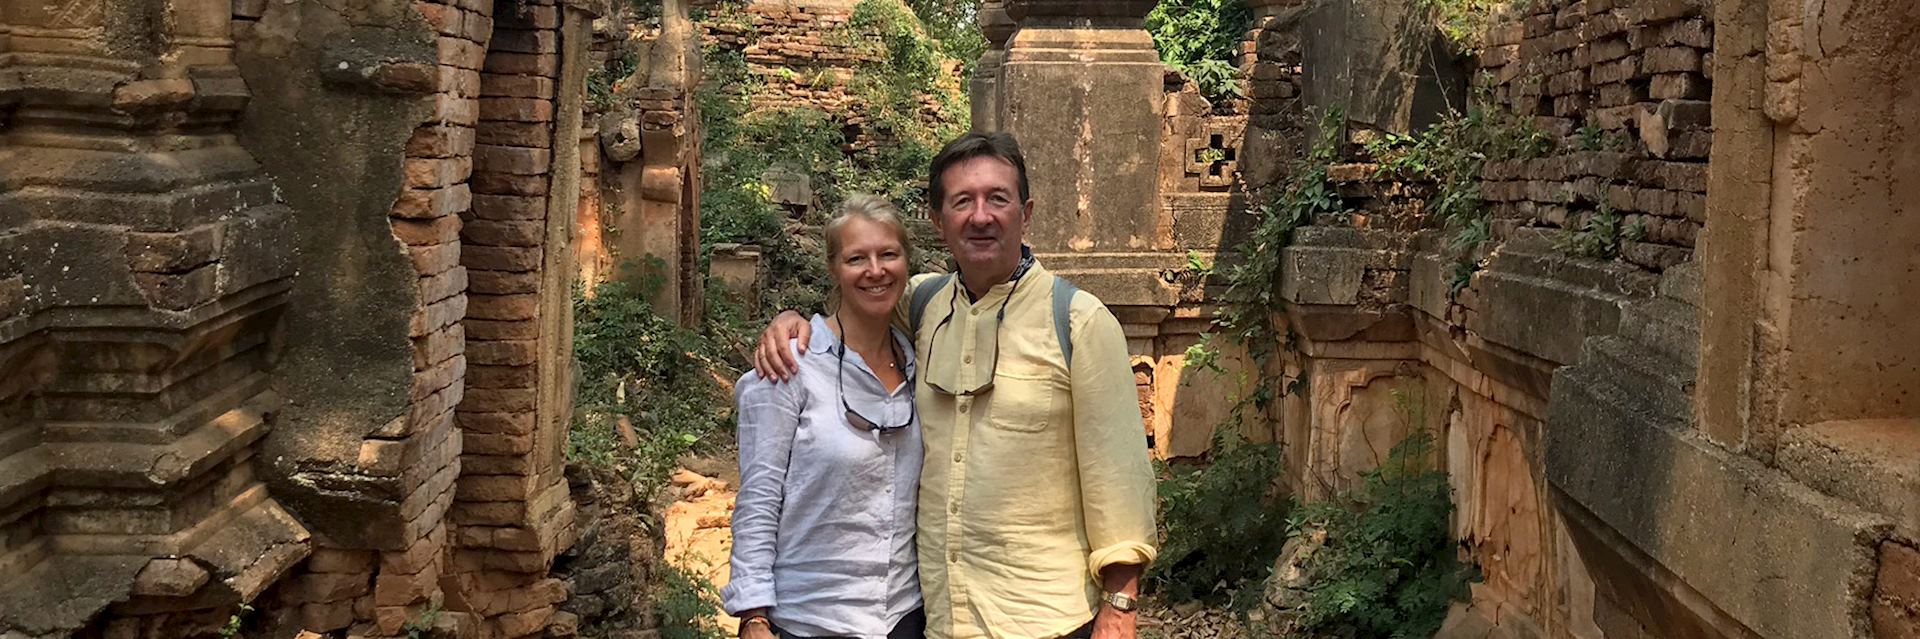 David and Helene on their round-the-world trip — © David Moore                                                                                                  